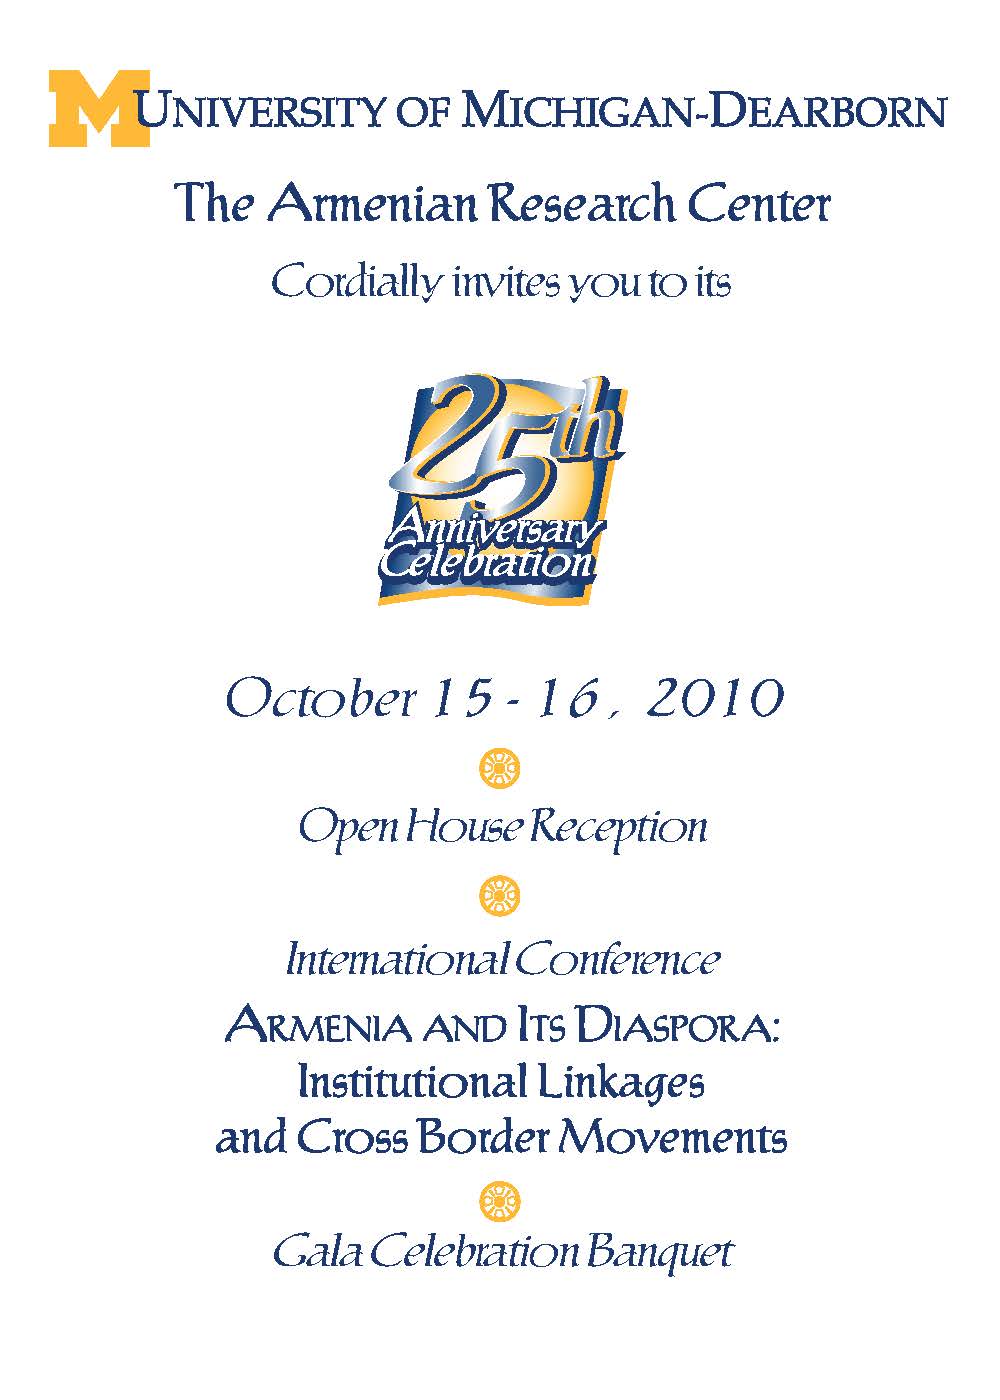 Invitation: UM-Dearborn The Armenian Research Center Cordially invites you to its 25th Anniversary Celebration, October 15-16, 2010. Open House Reception. International Conference: Armenia and Its Diaspora: Institutional Linkages and Cross Border Movements. Gala Celebration Banquet